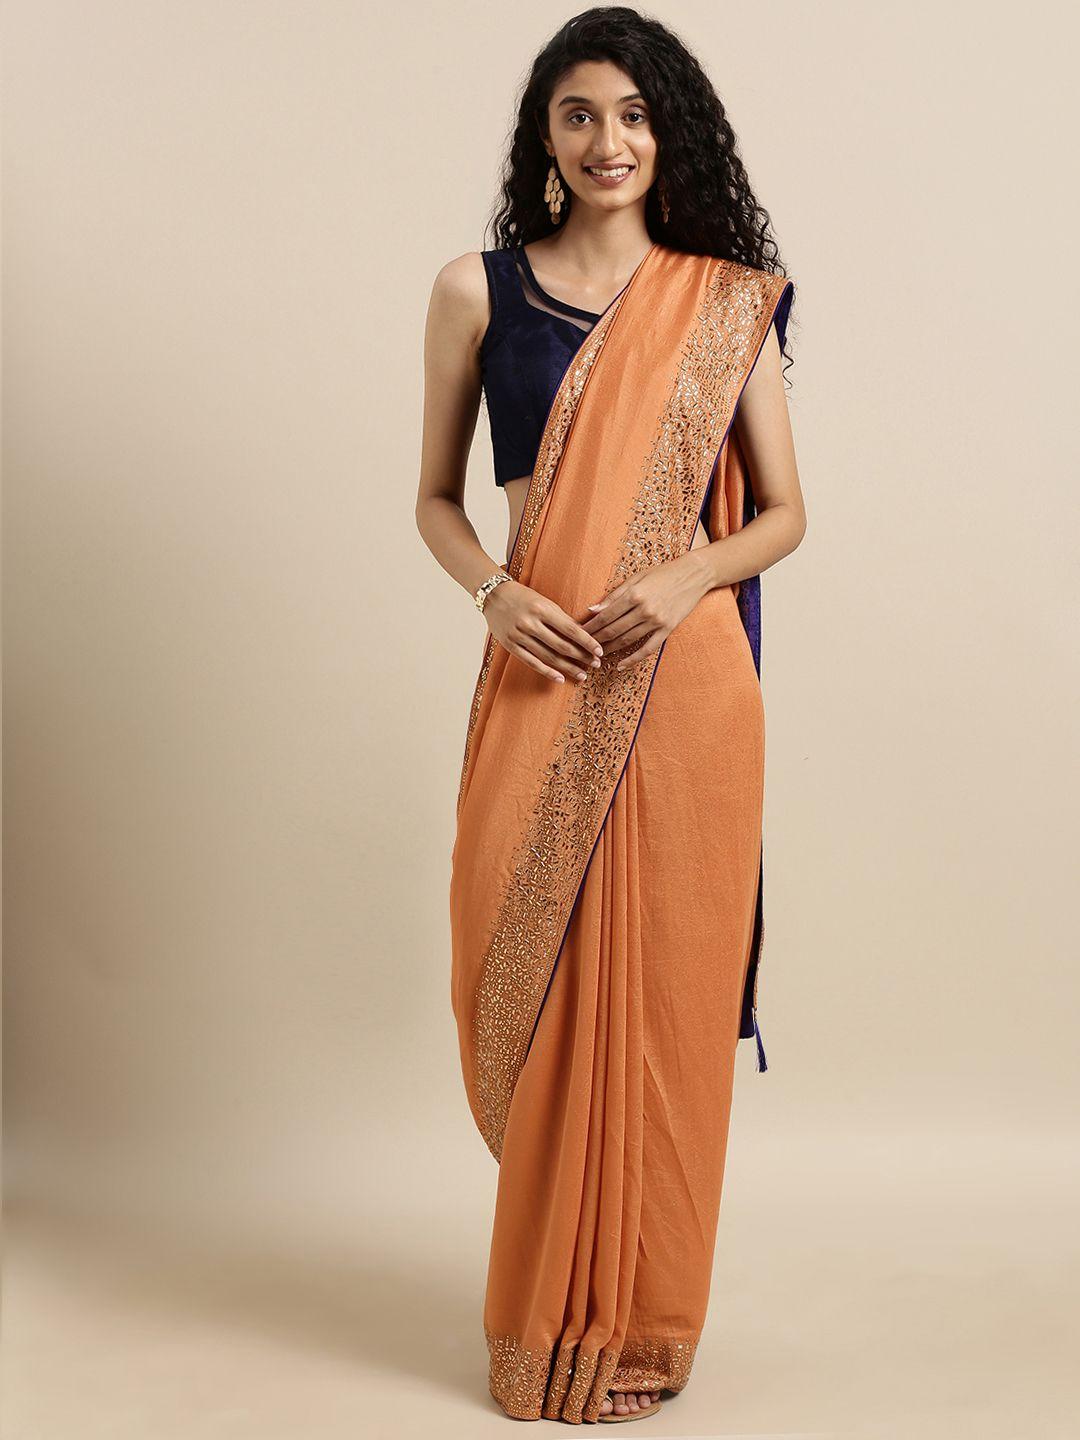 VASTRANAND Peach-Coloured Solid Vichitra Poly Silk Saree with Embellished Border